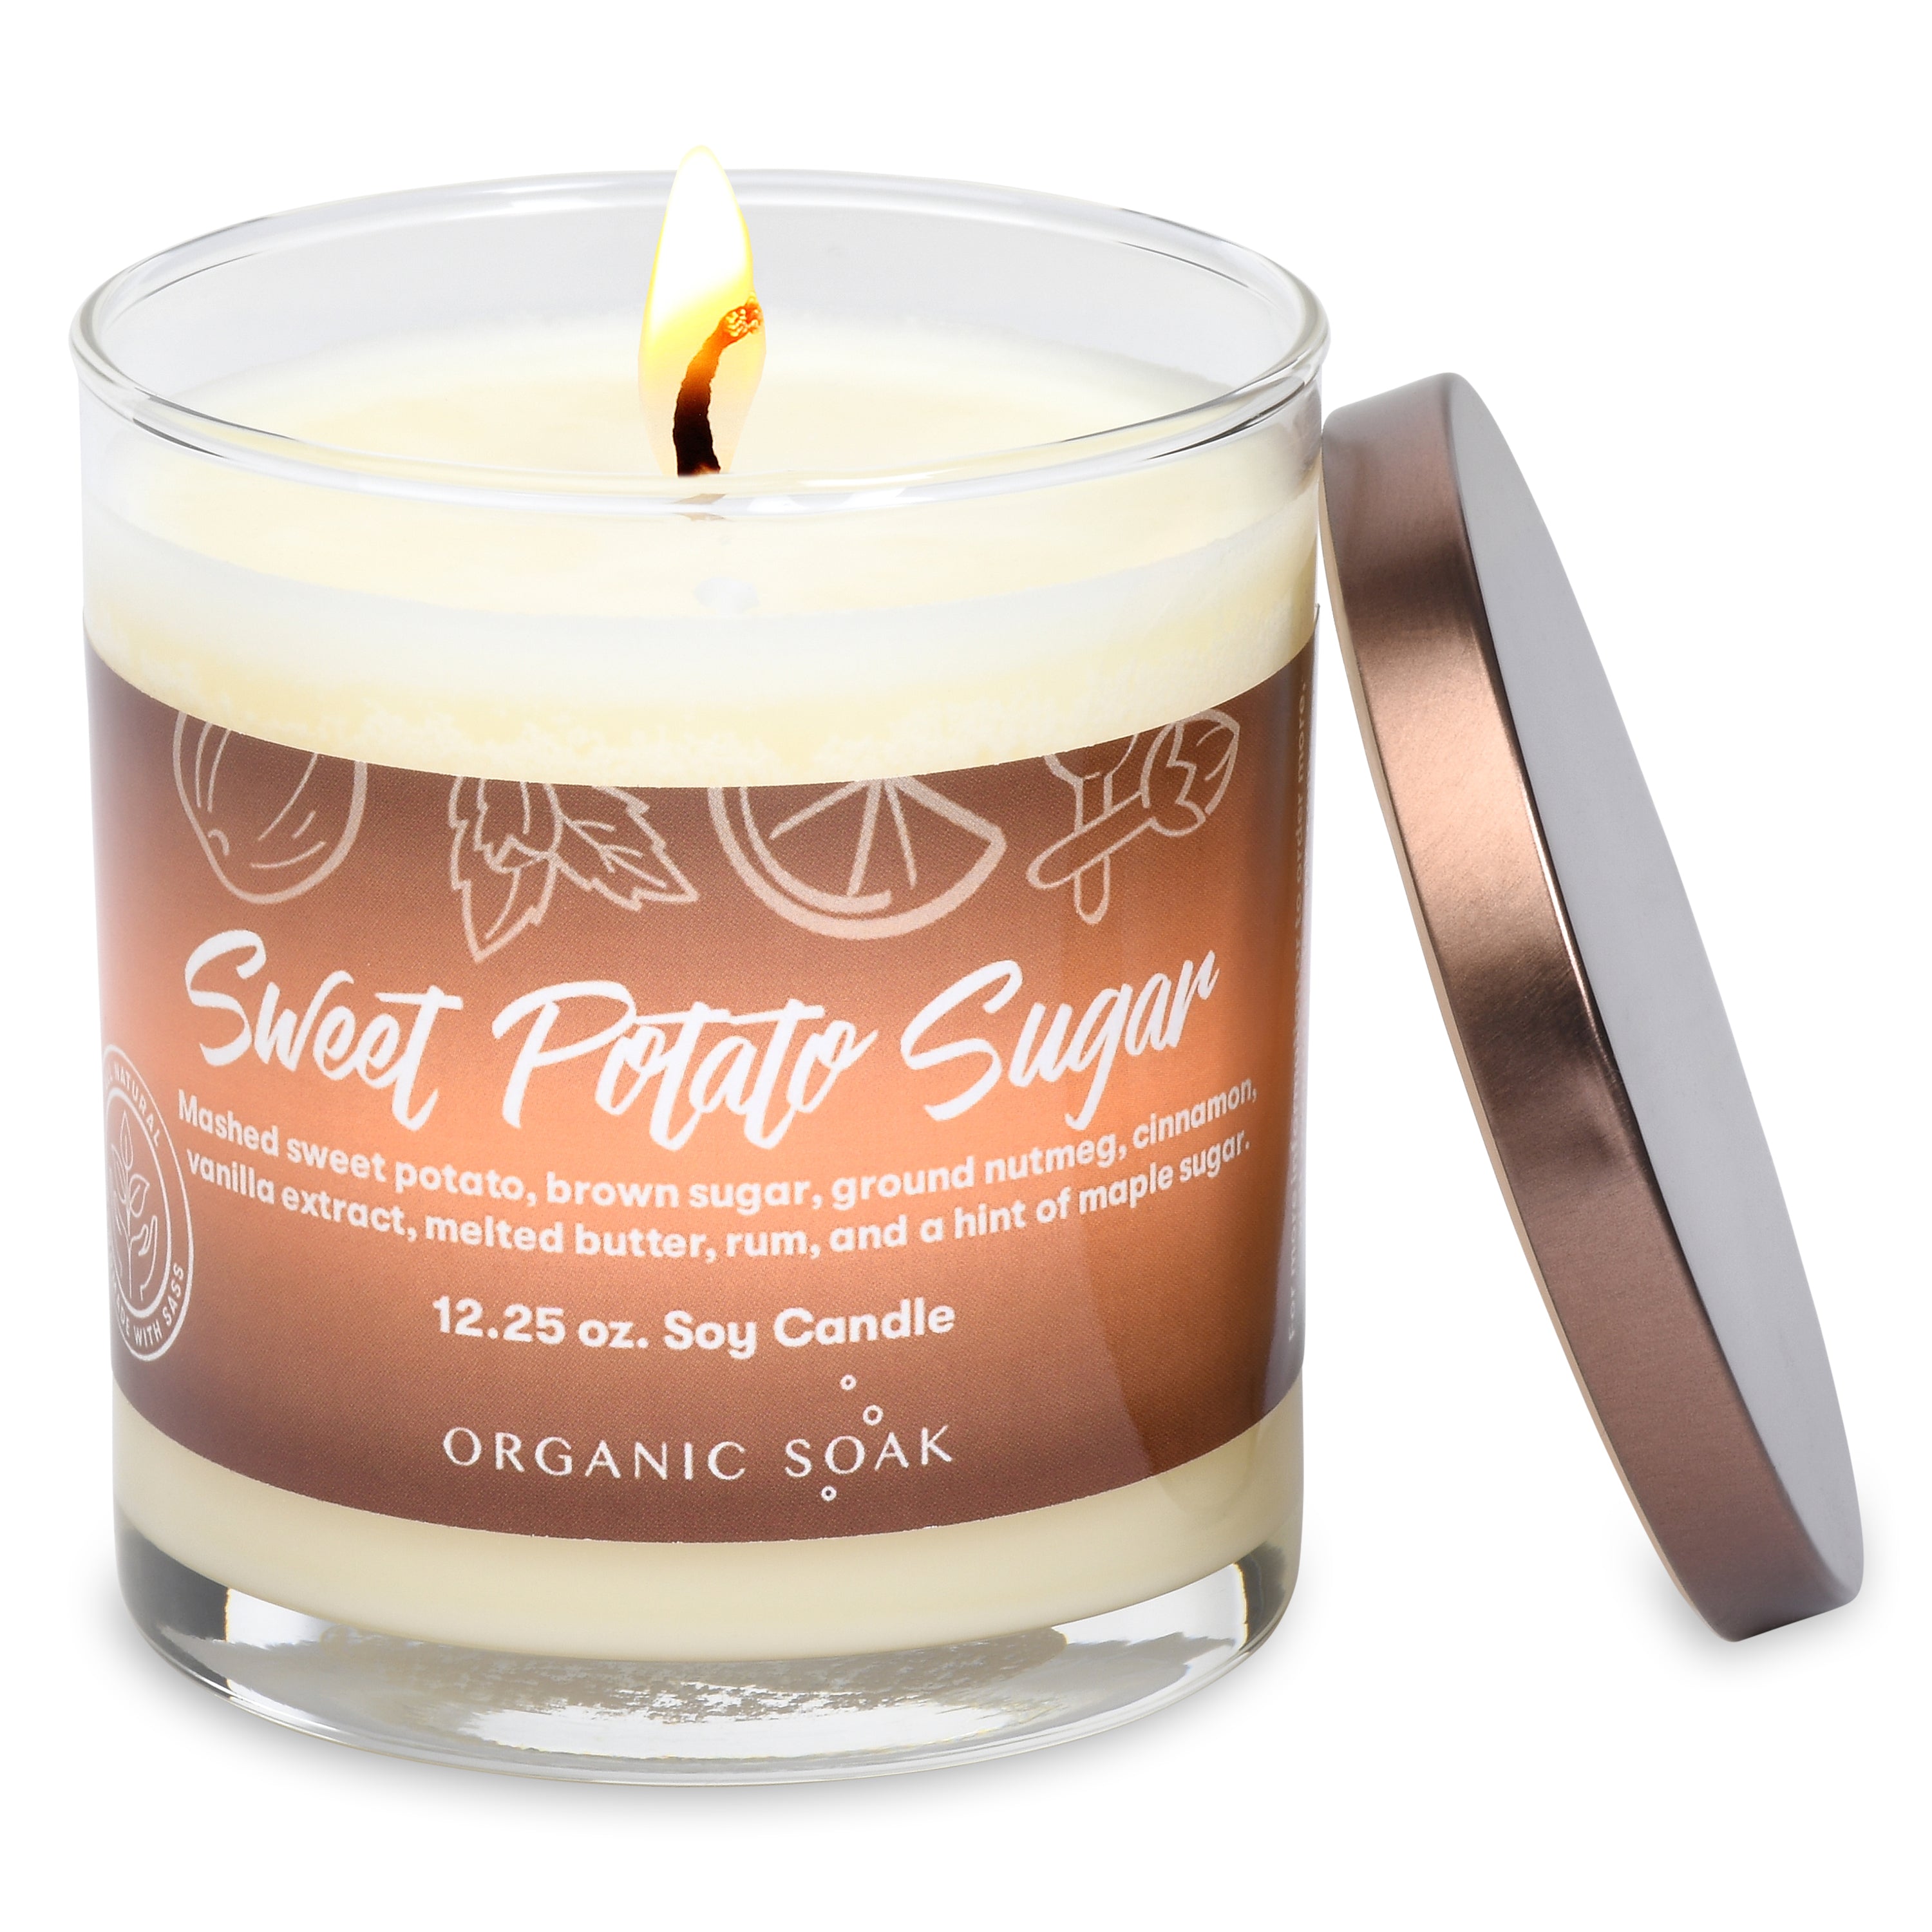 Sweet Potato Sugar Scented Soy Candle